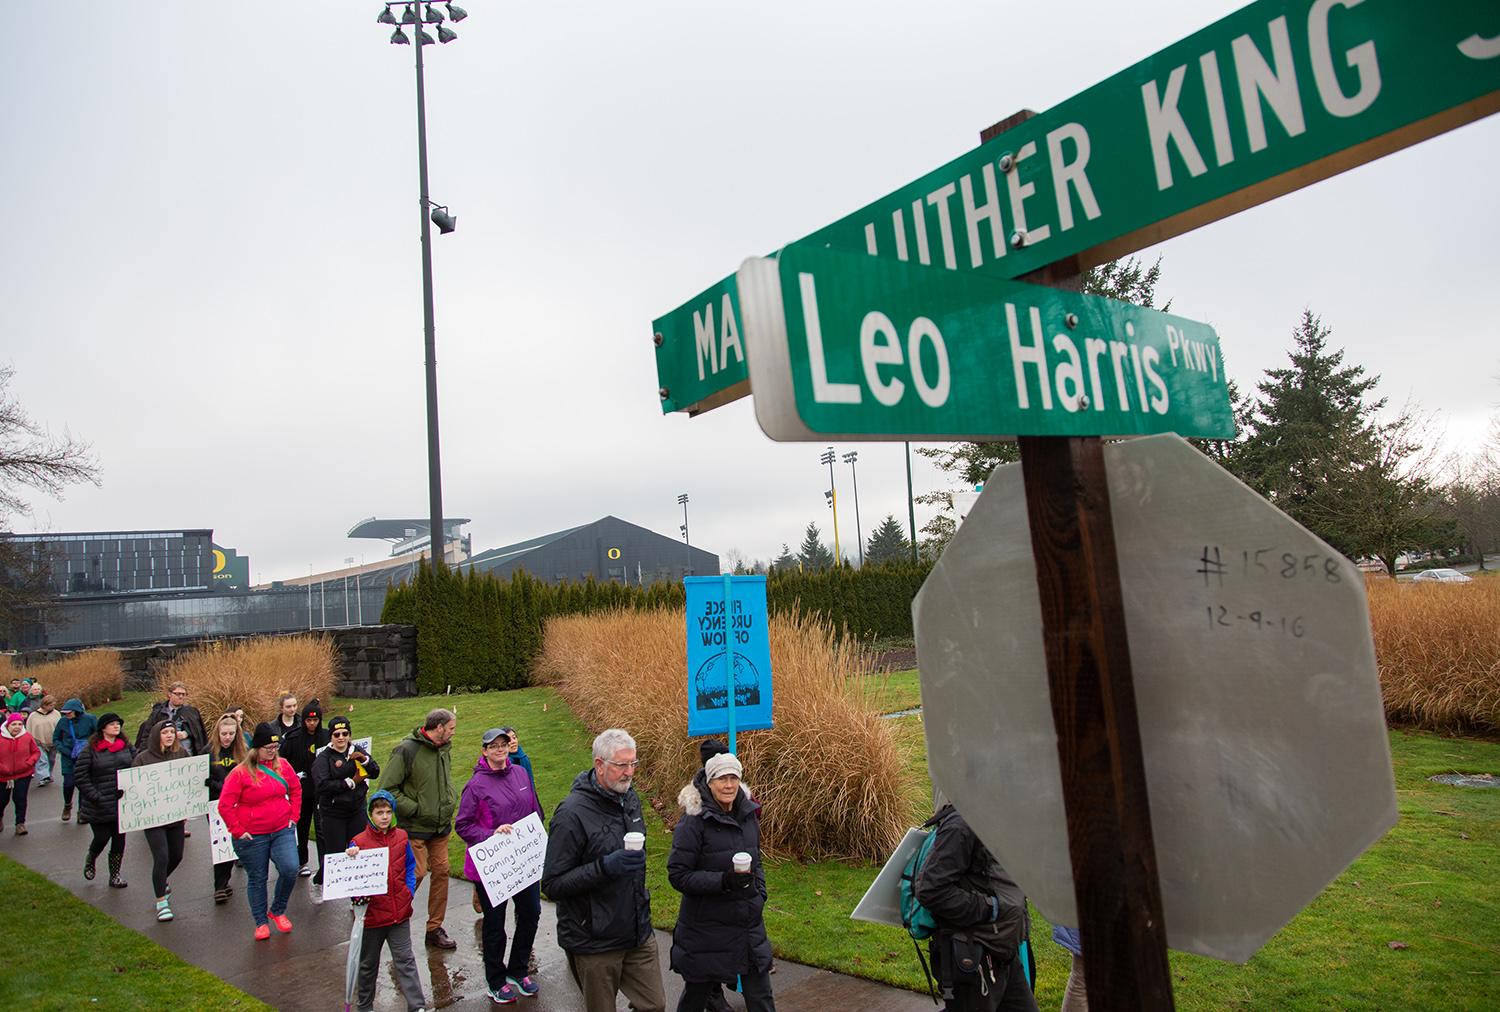  People file past Autzen Stadium during a Martin Luther King Jr. march Monday, Jan. 21, in Eugene. More than 200 attended a rally, then marched nearly 2 miles downtown to the Shedd Institute. 